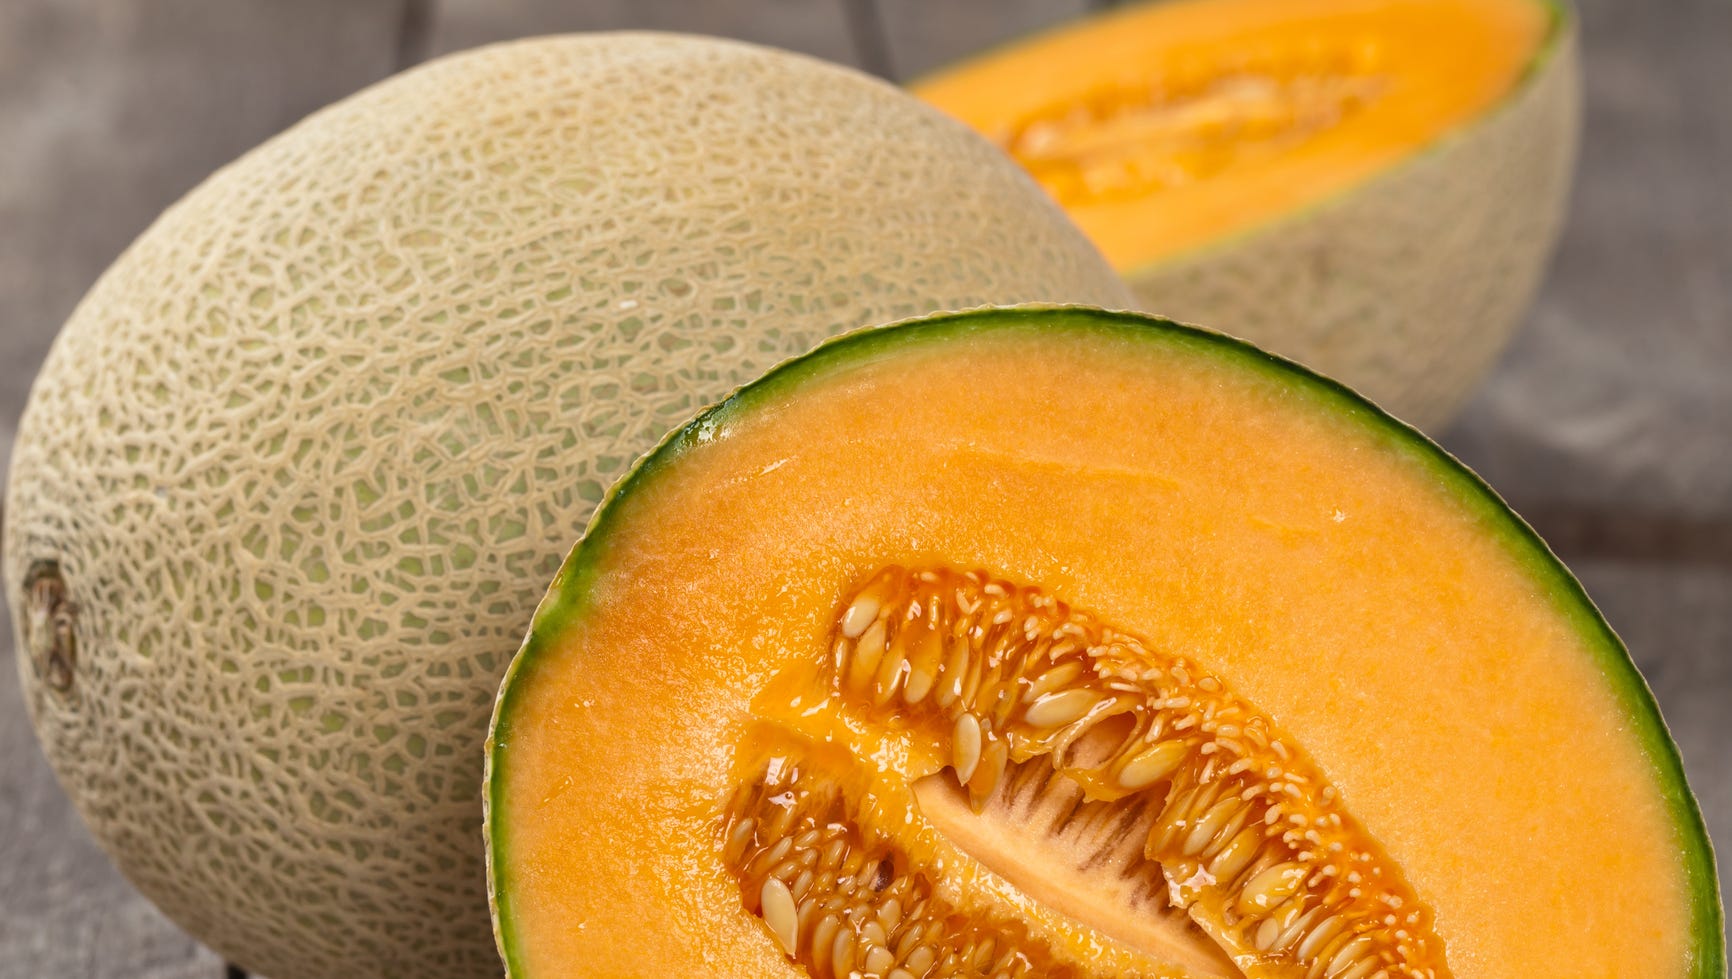 Here's how to pick, prepare and enjoy this delicious melon. 